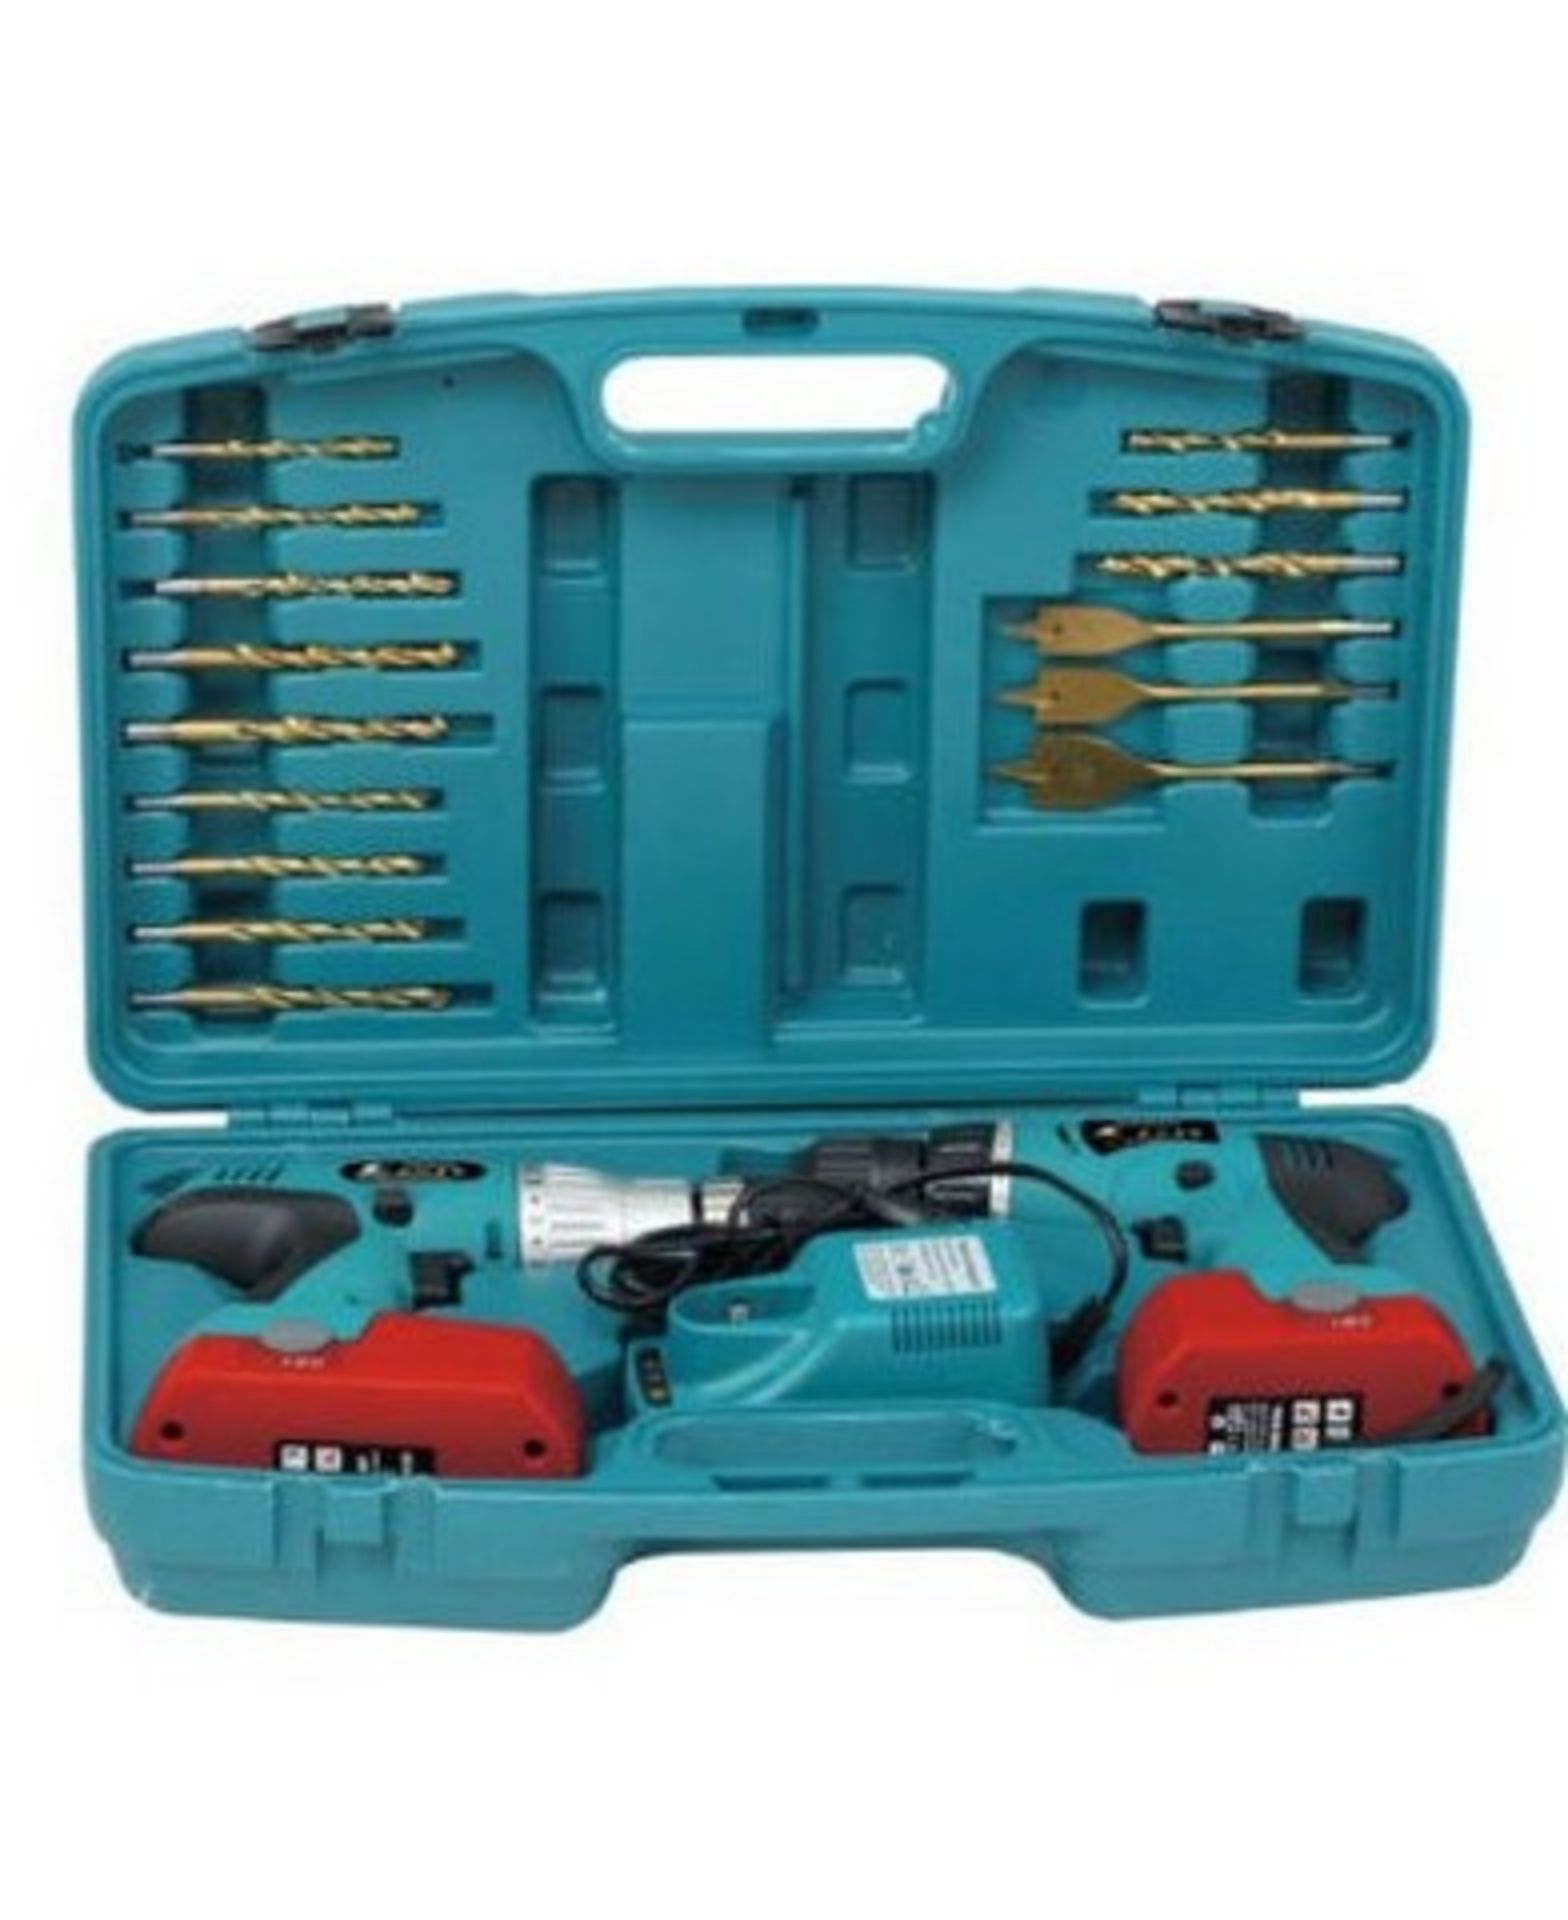 V Brand New 18V Twin Drill Kit with Hammer Action and Torque Adjustment - with 15 Asssorted Drill - Image 2 of 2